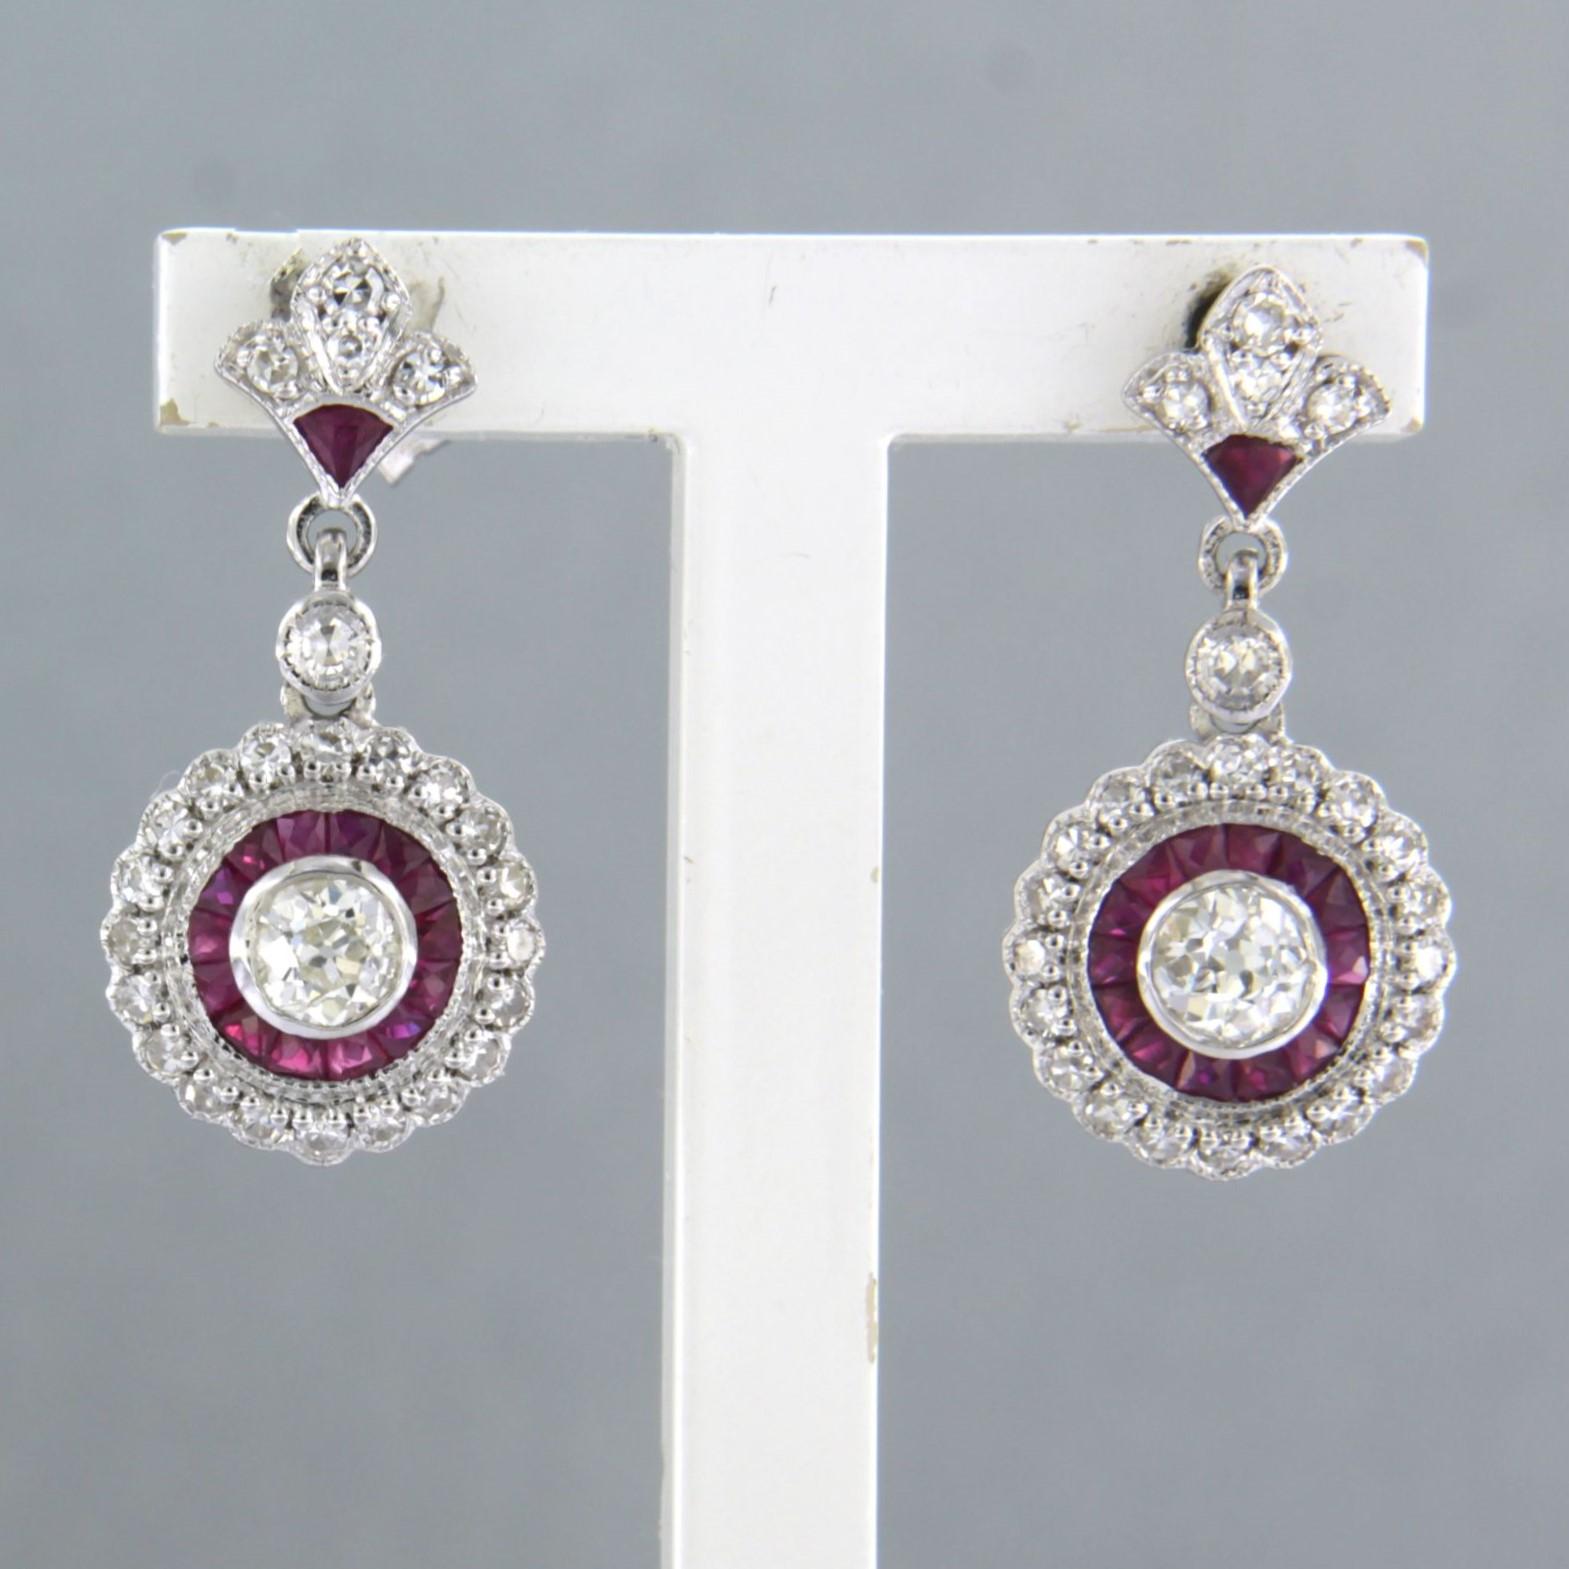 14k white gold earrings set with ruby ​​and old mine – and single cut diamond up to 0.78ct - F/G – SI, VS/SI

Detailed description:

the size of the earring is 2.2 cm long by 1.0 cm wide

Total weight 3.9 grams

set with

- 28 x 1.5 mm